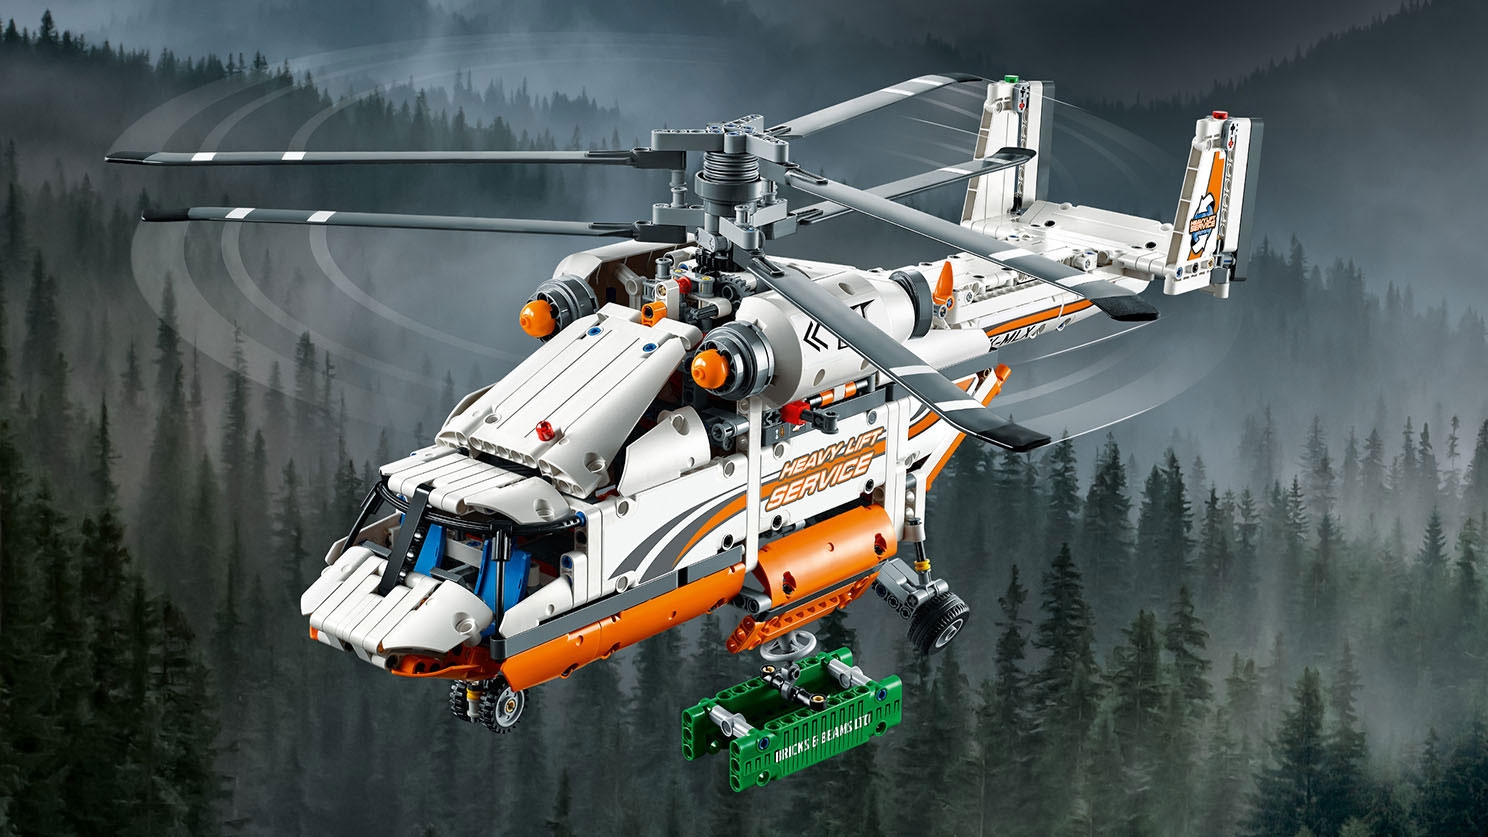 Lift Helicopter - LEGO® Technic - LEGO.com for